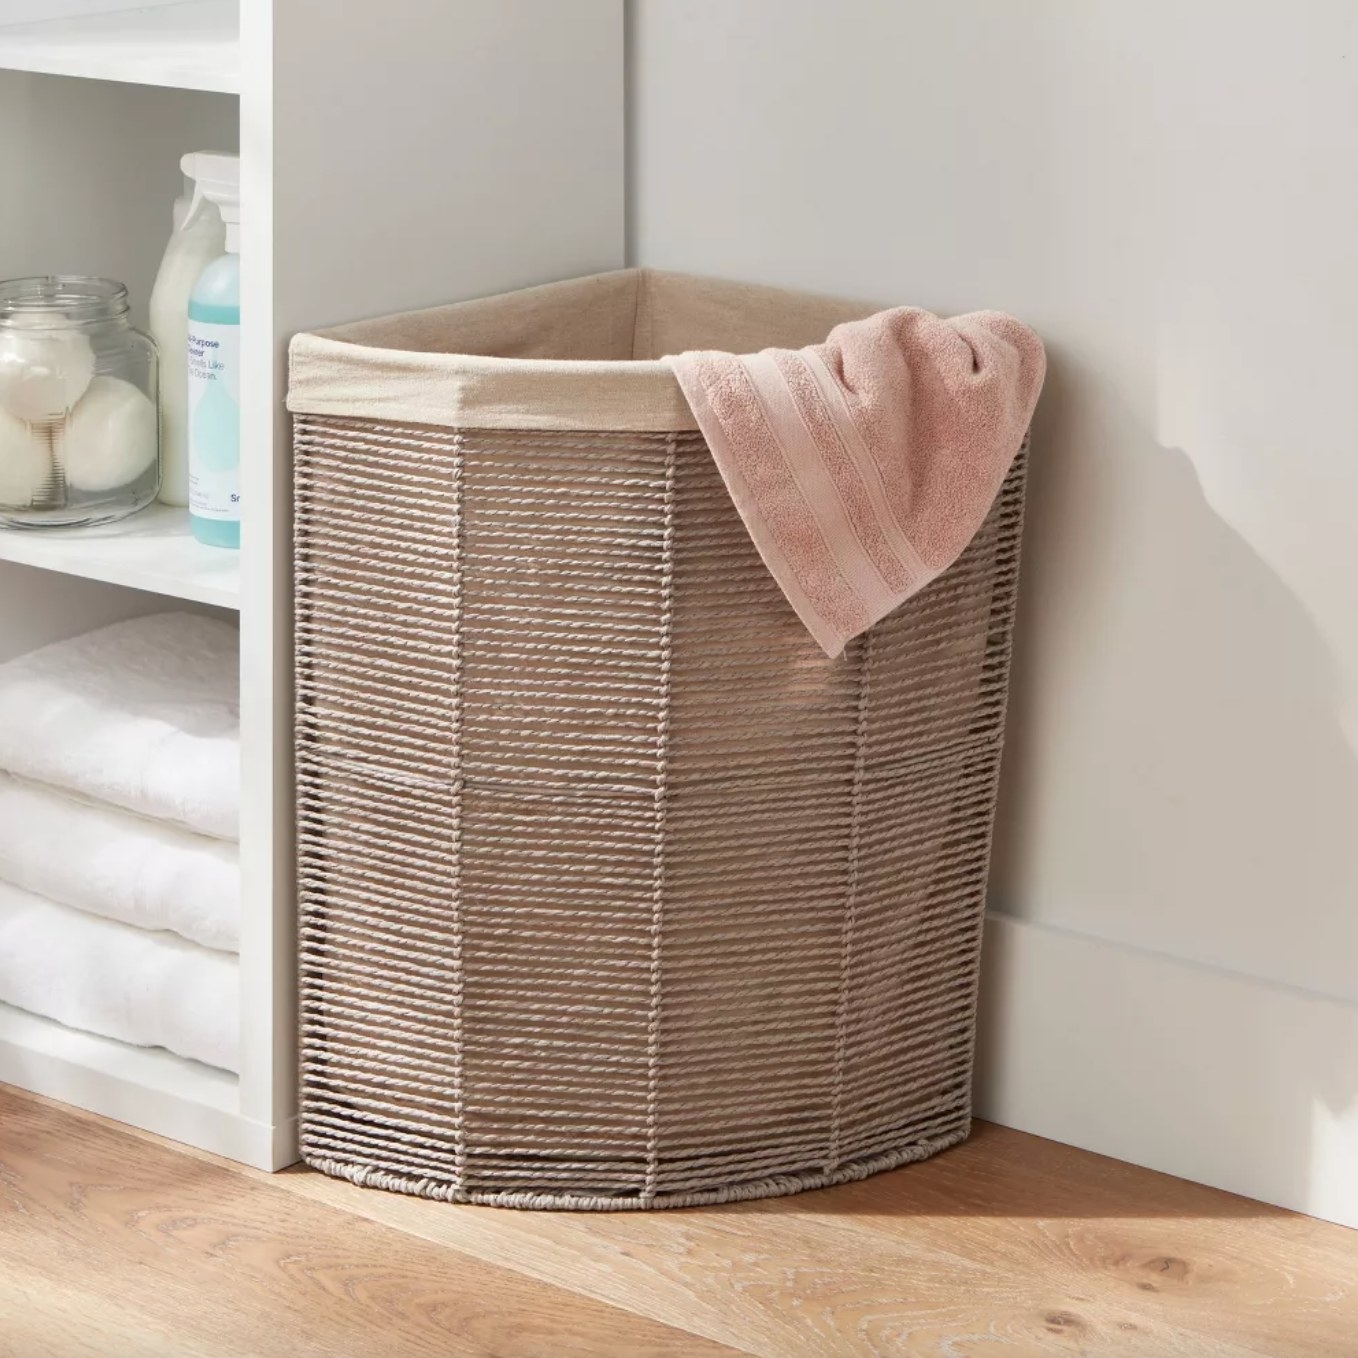 the lined tan wicker hamper in the corner of a decorated laundry area